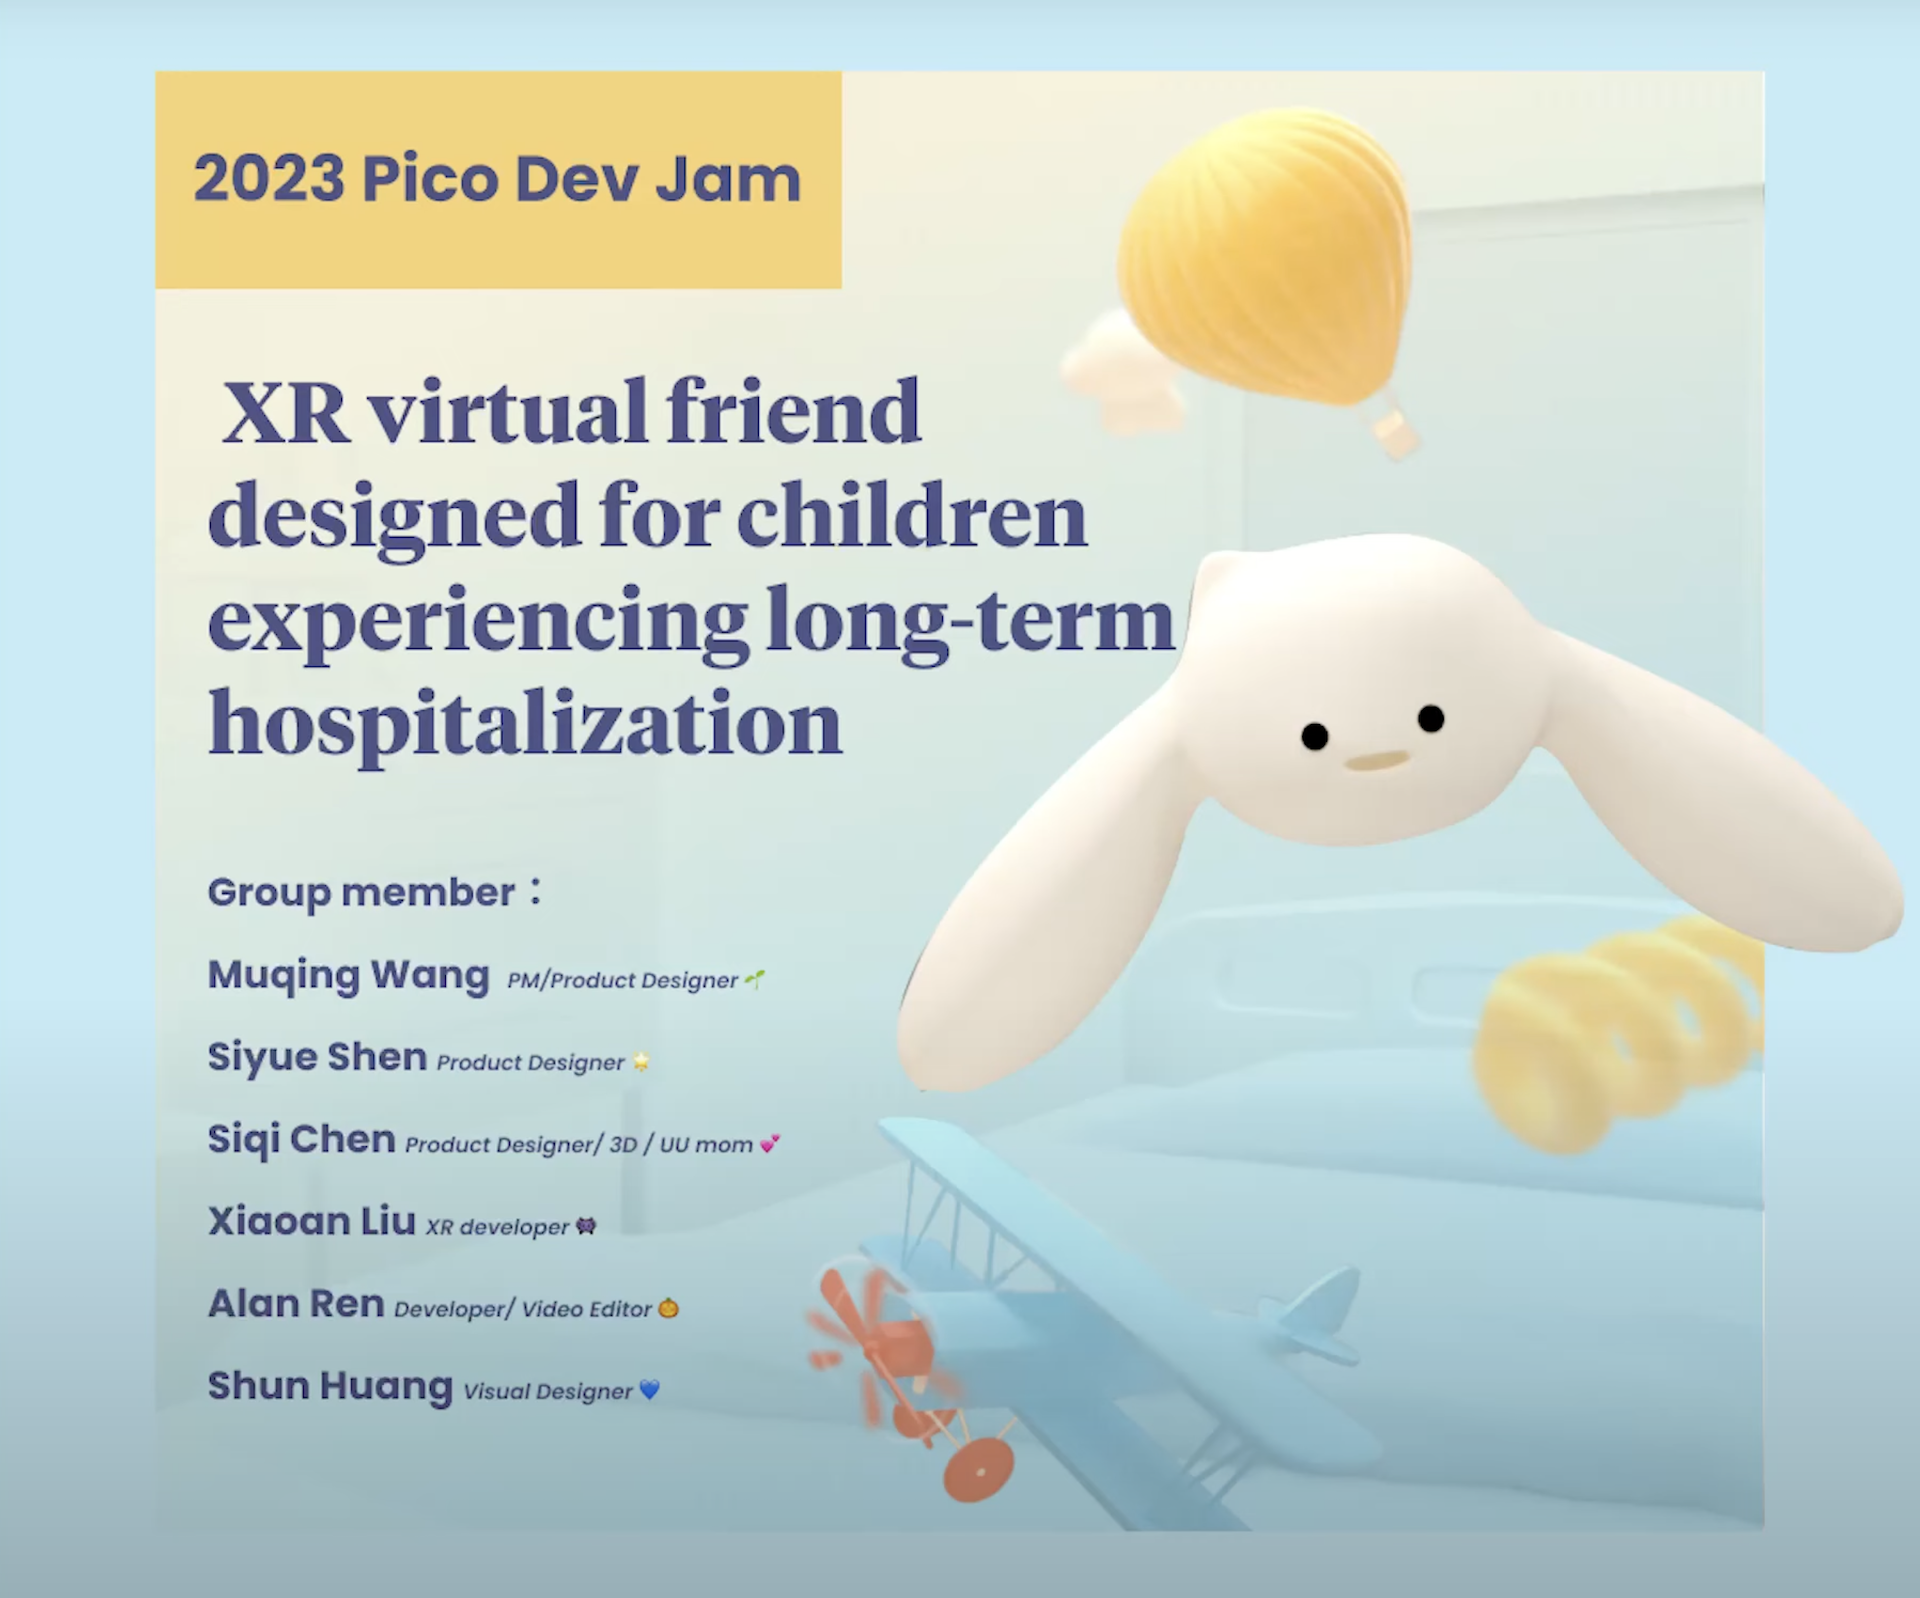 2023 Pico Dev Jam. XR Virtual friend designed for children experiencing long-term hopitalization. Group members listed.